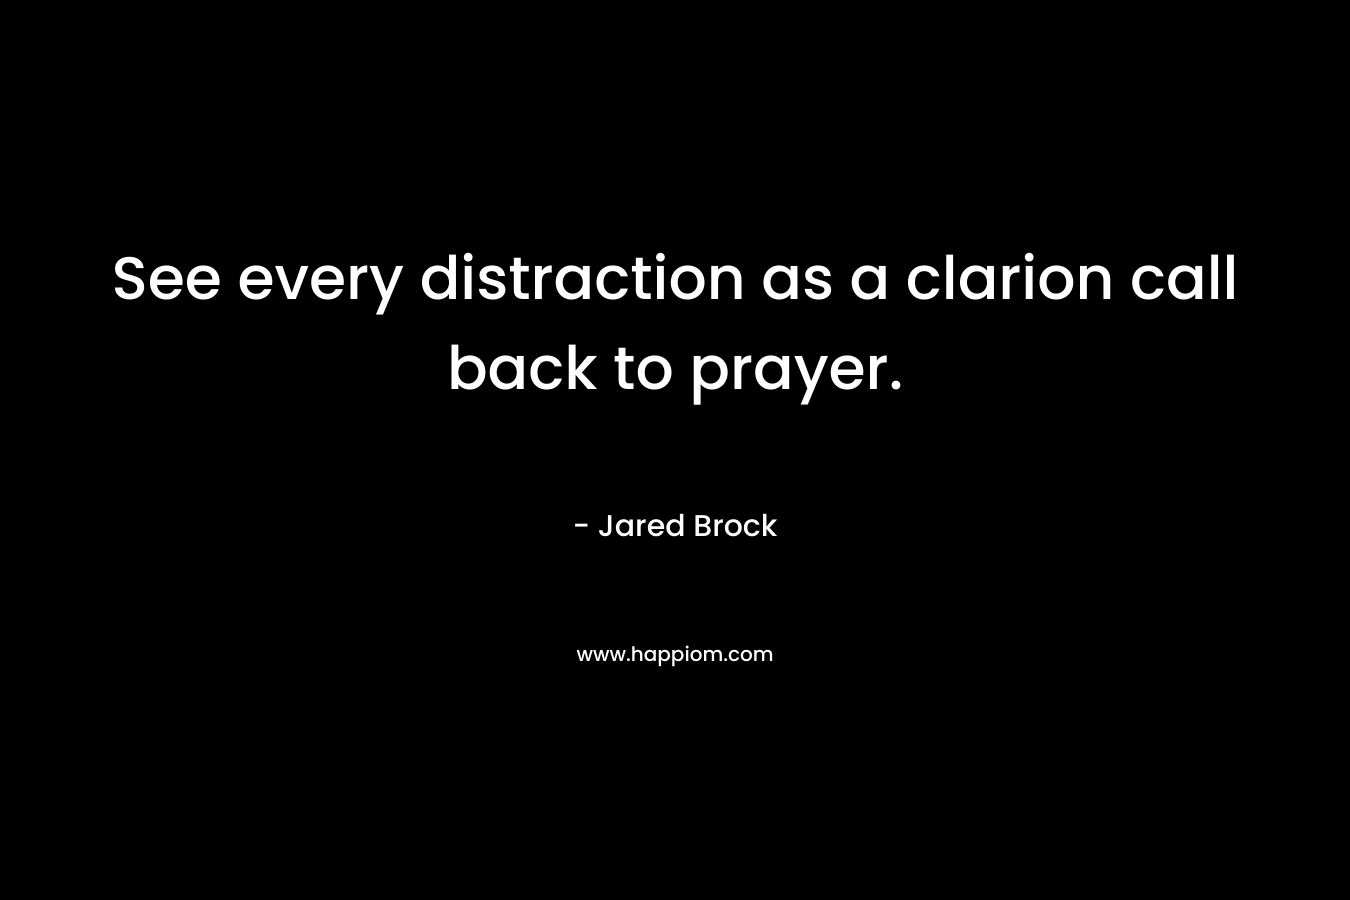 See every distraction as a clarion call back to prayer.